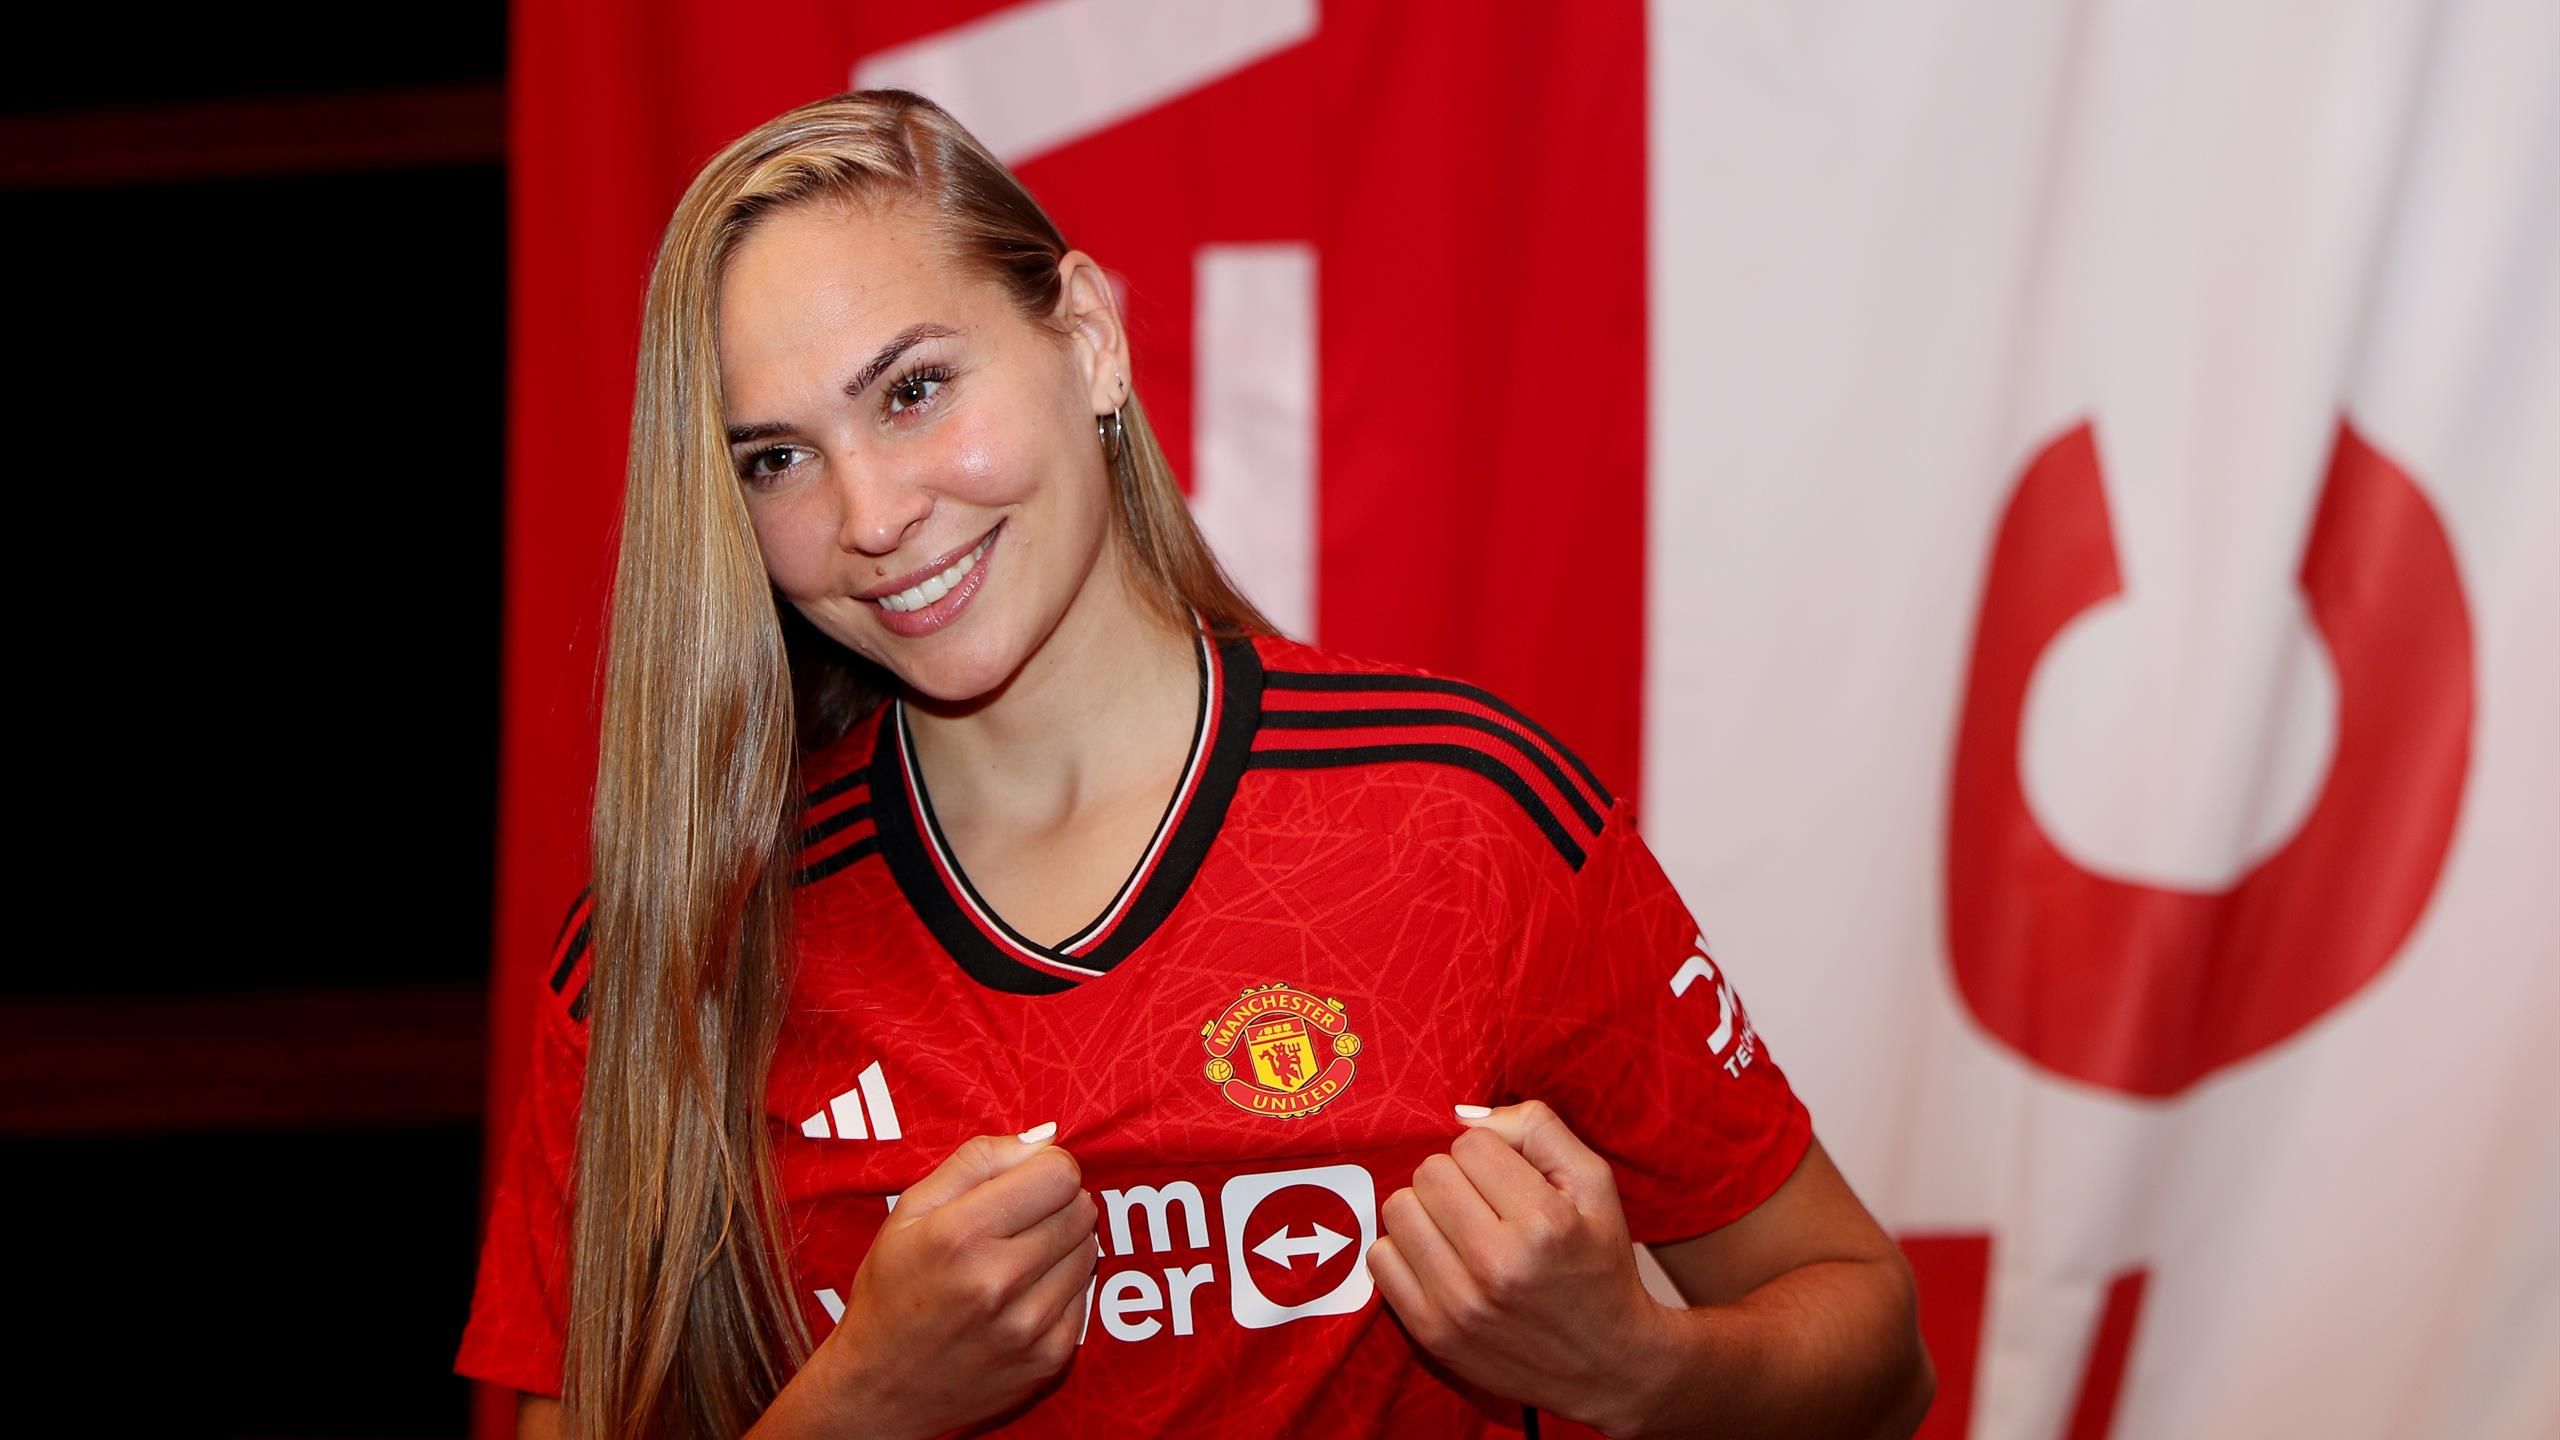 girl wearing manchester united jersey